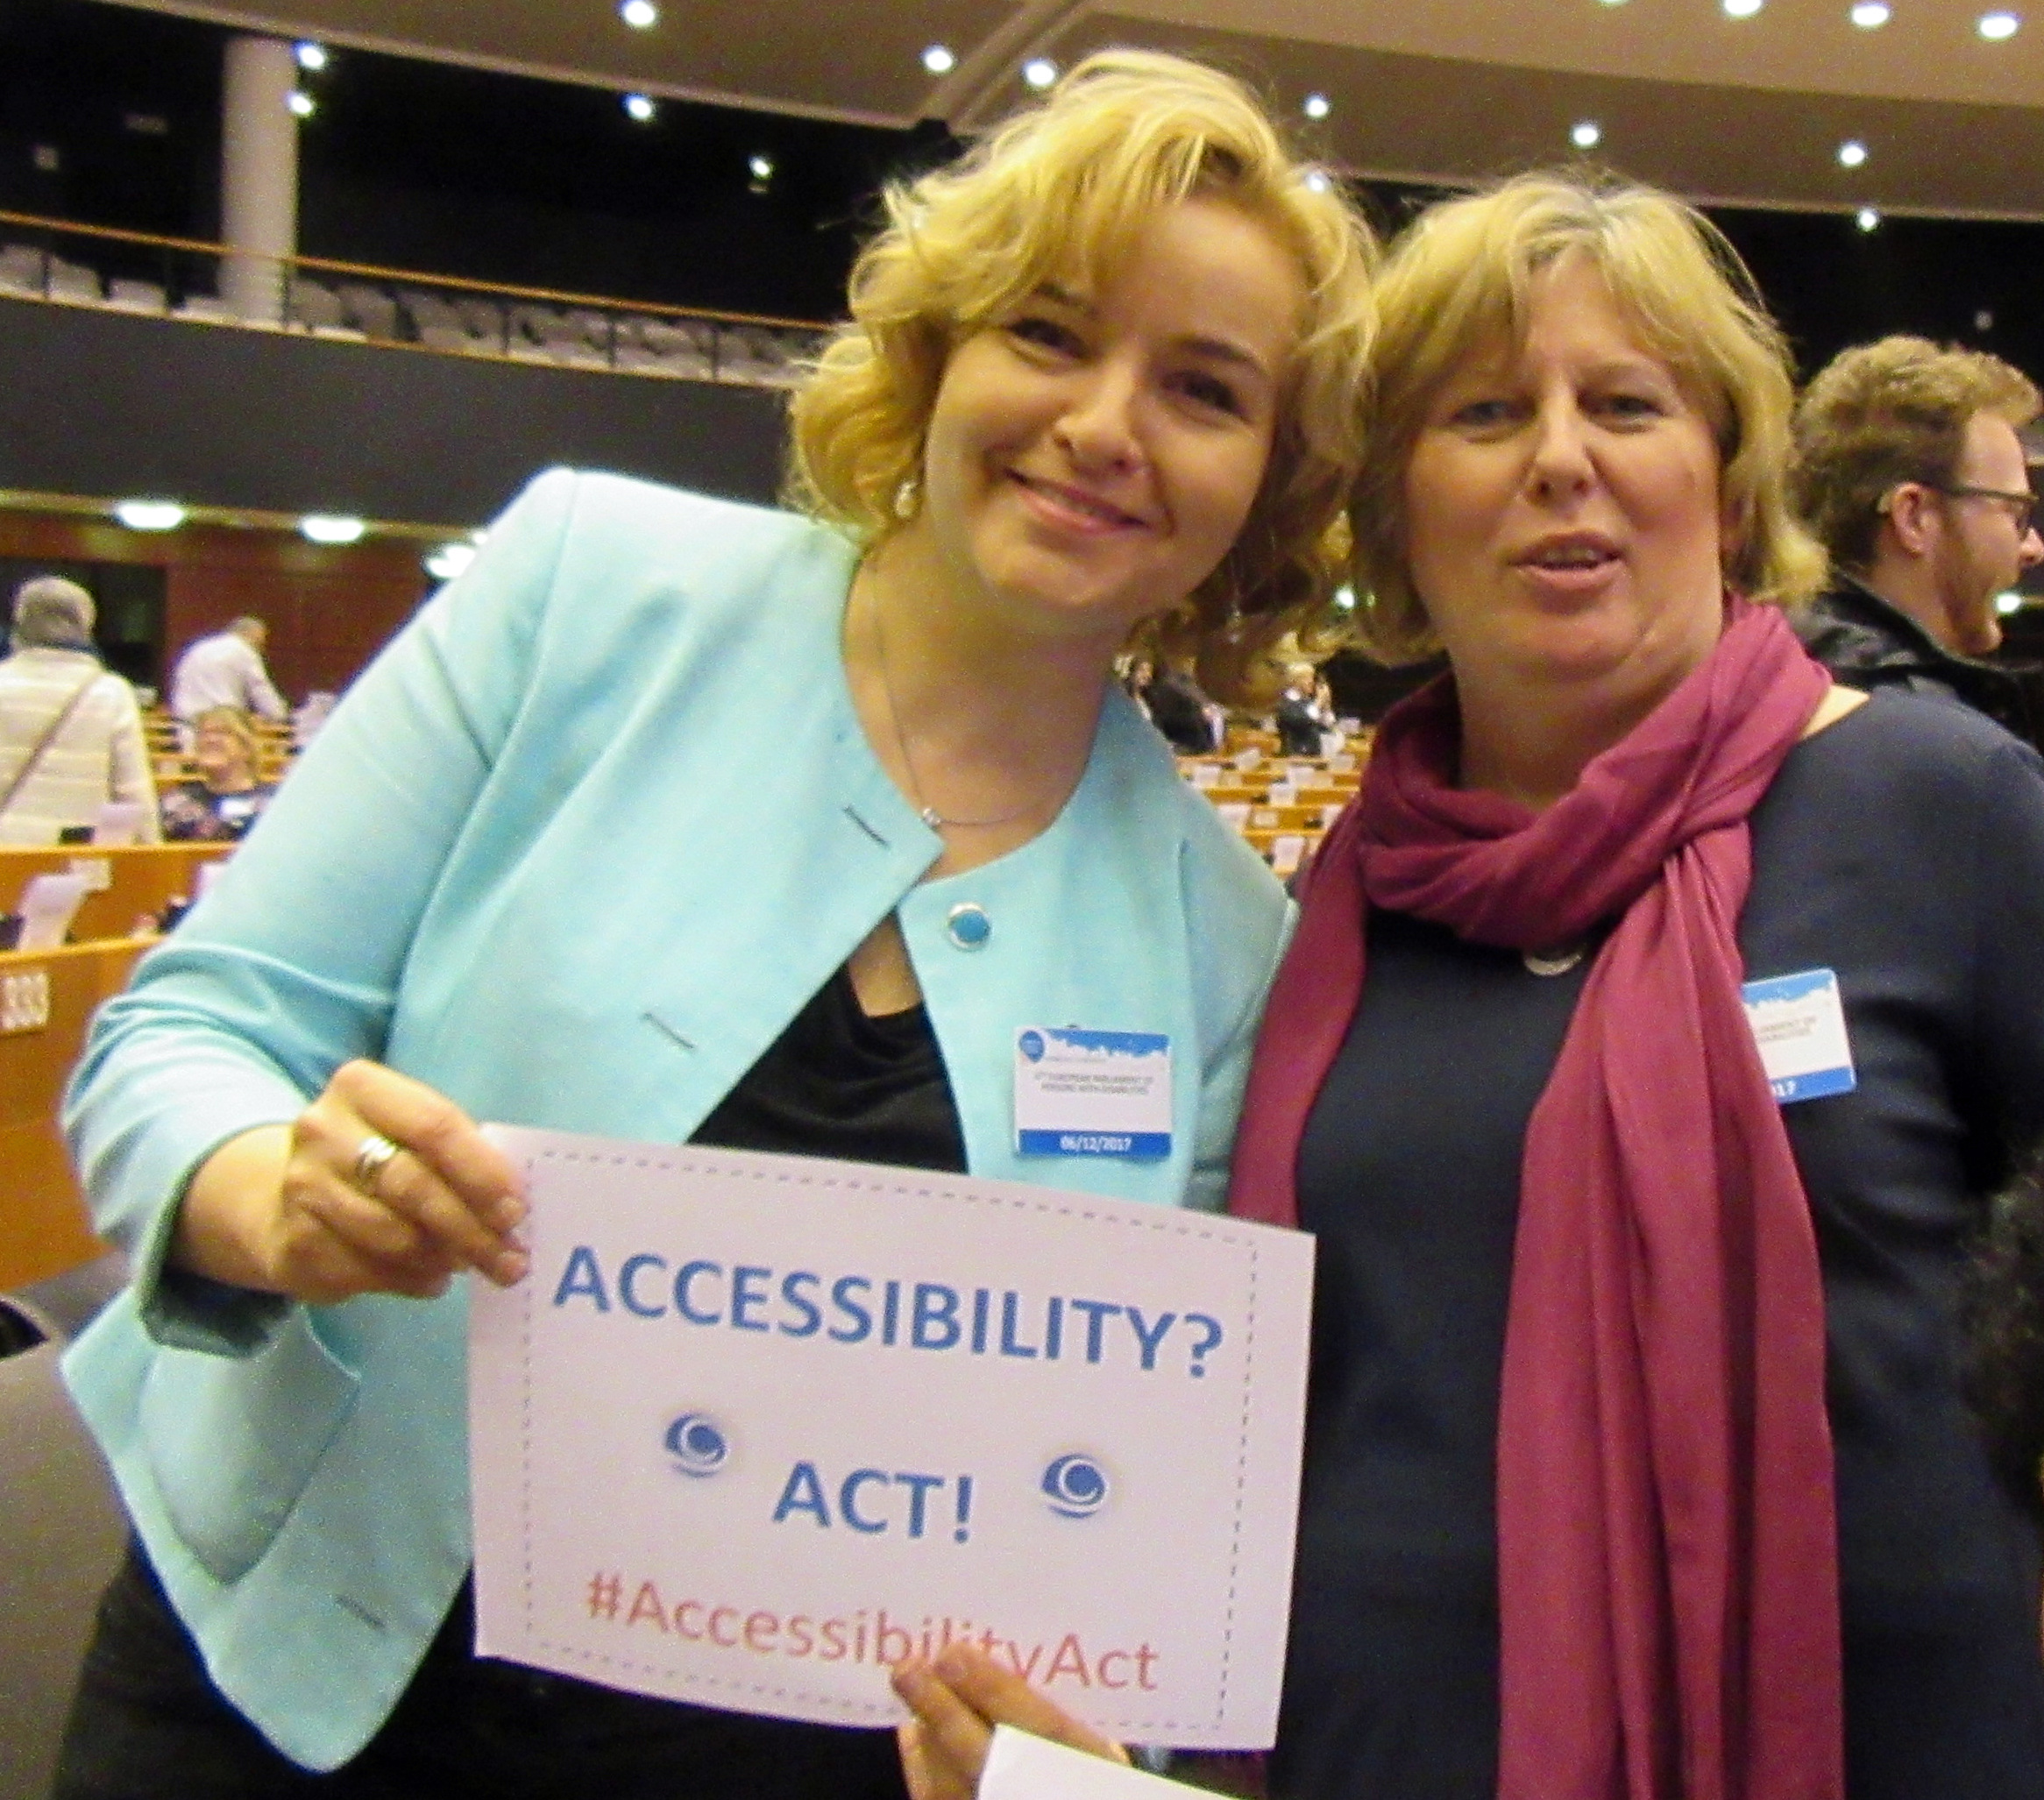 Let’s talk about Accessibility!